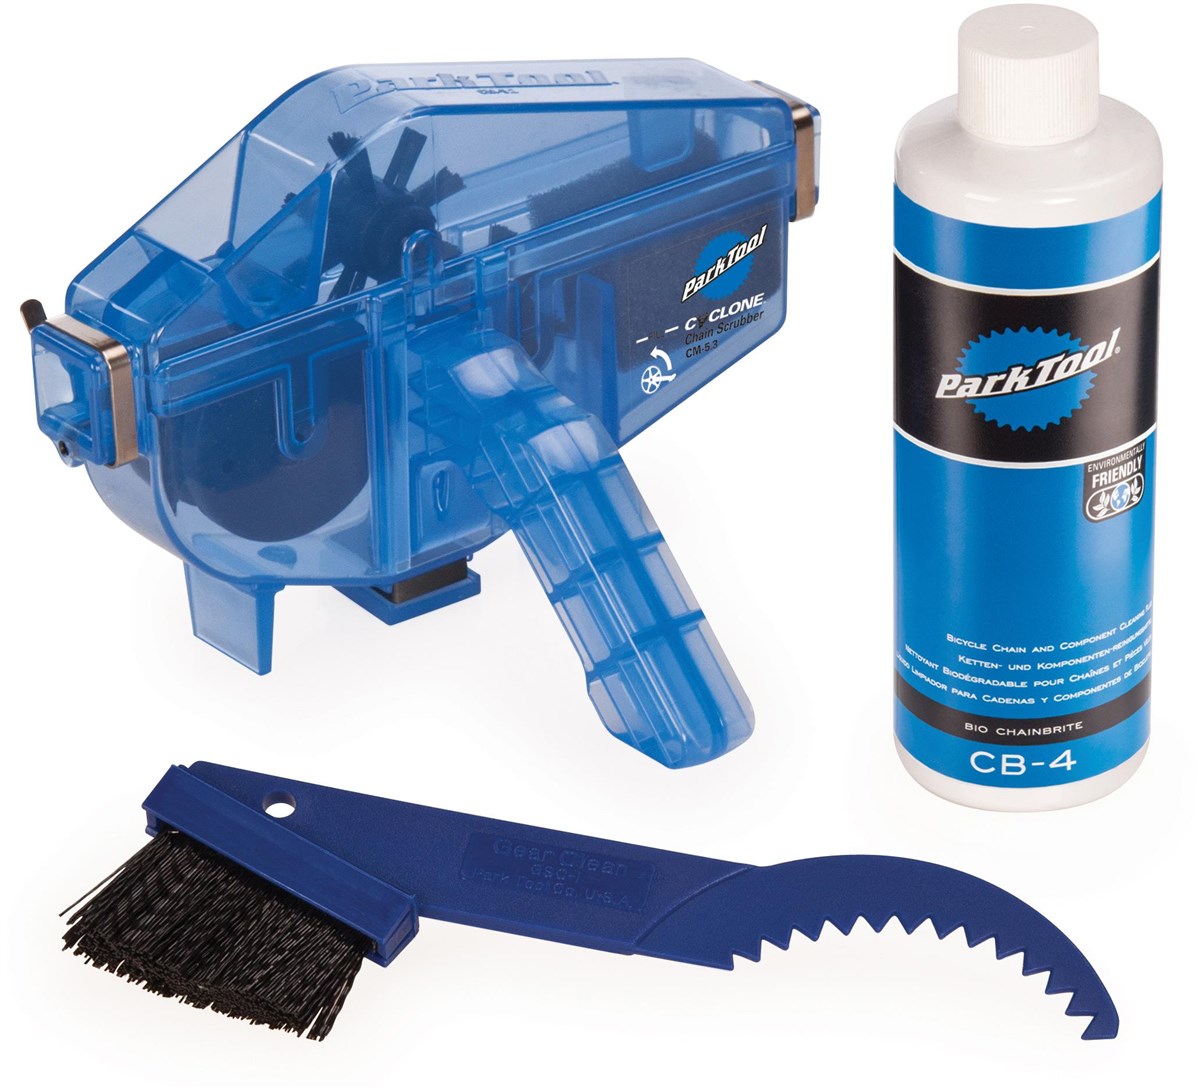 Park Tool CG-2.4 - Chaingang Cleaning System product image